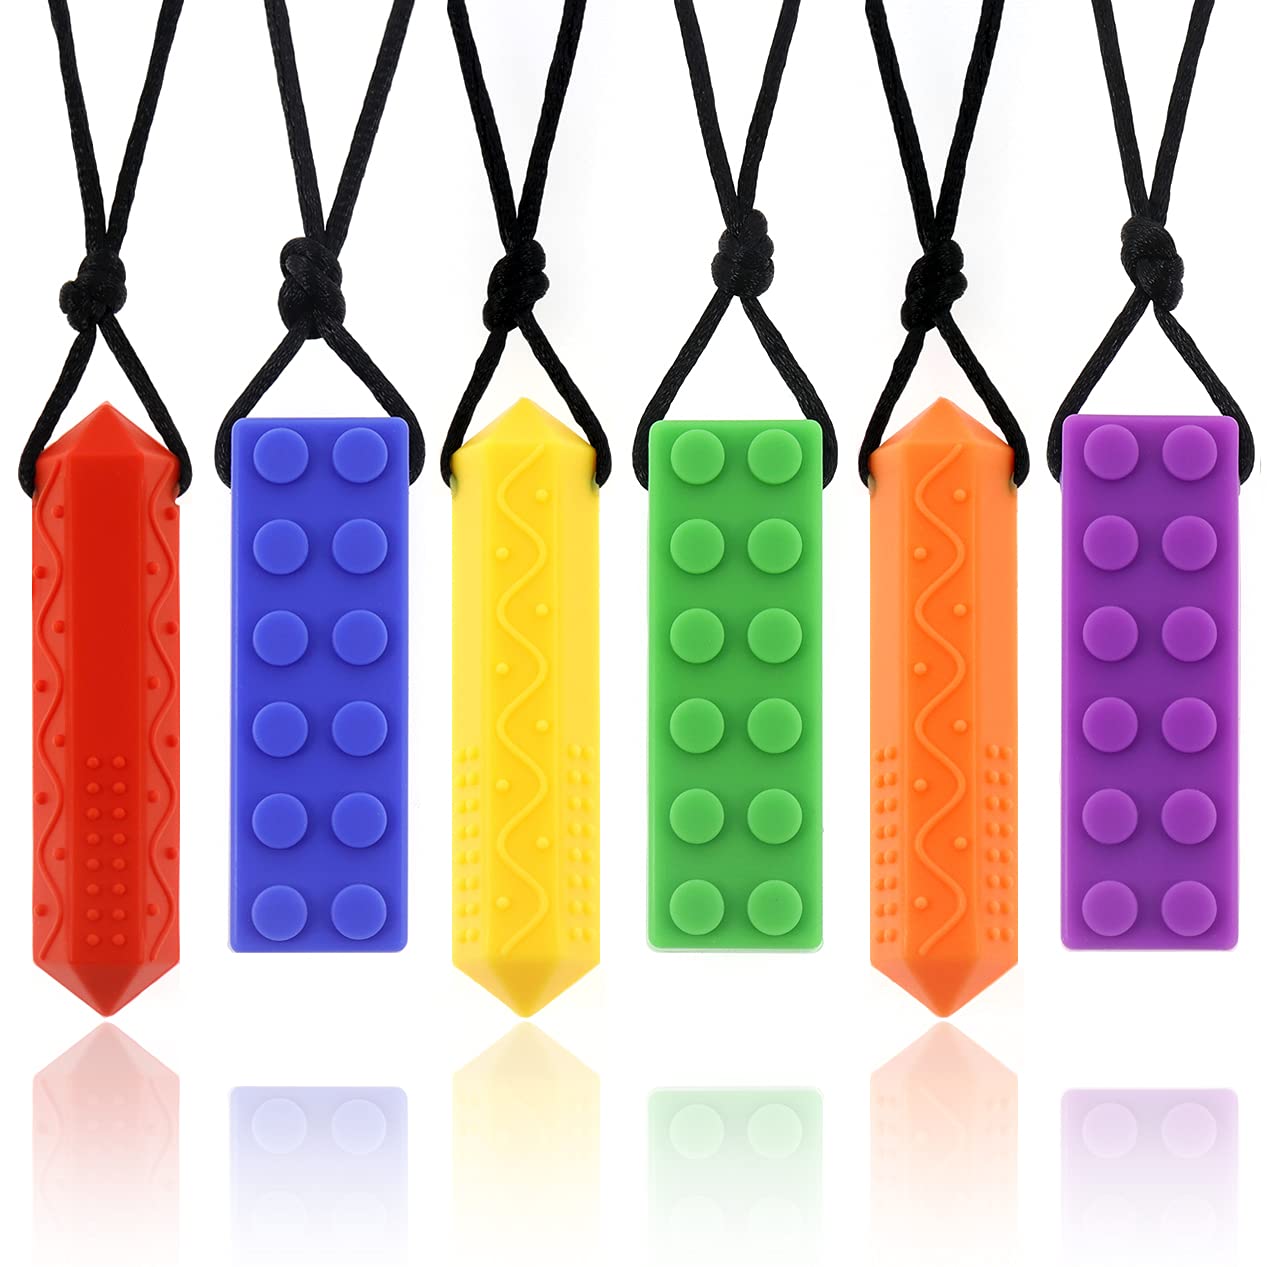 Sensory Chew Necklaces(6 Pack) for Kids with Teething, ADHD, Autism, Biting Needs, Oral Motor Chewy Teether, Silicone chewlery Jewellery Necklace for Boys and Girls (mix1)